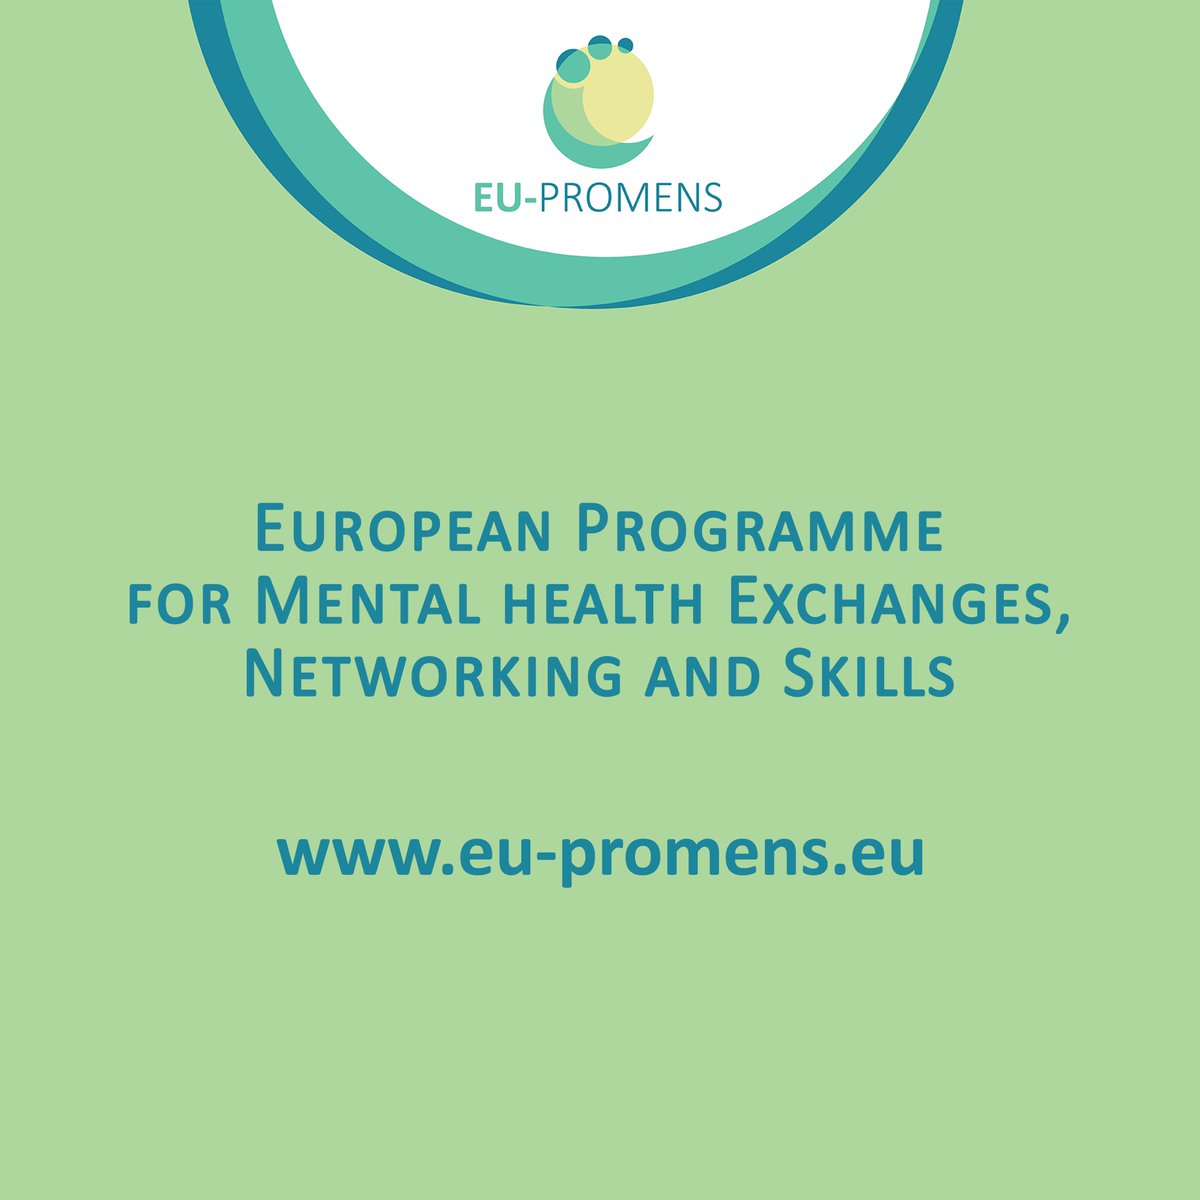 Under the #EU4Health programme, the EU is funding EU-PROMENS, which is promoting a comprehensive approach to mental health among health & other professionals through capacity-building events More info on upcoming events: eu-promens.eu/eu-promens #EuropeanMentalHealthAwarenessWeek